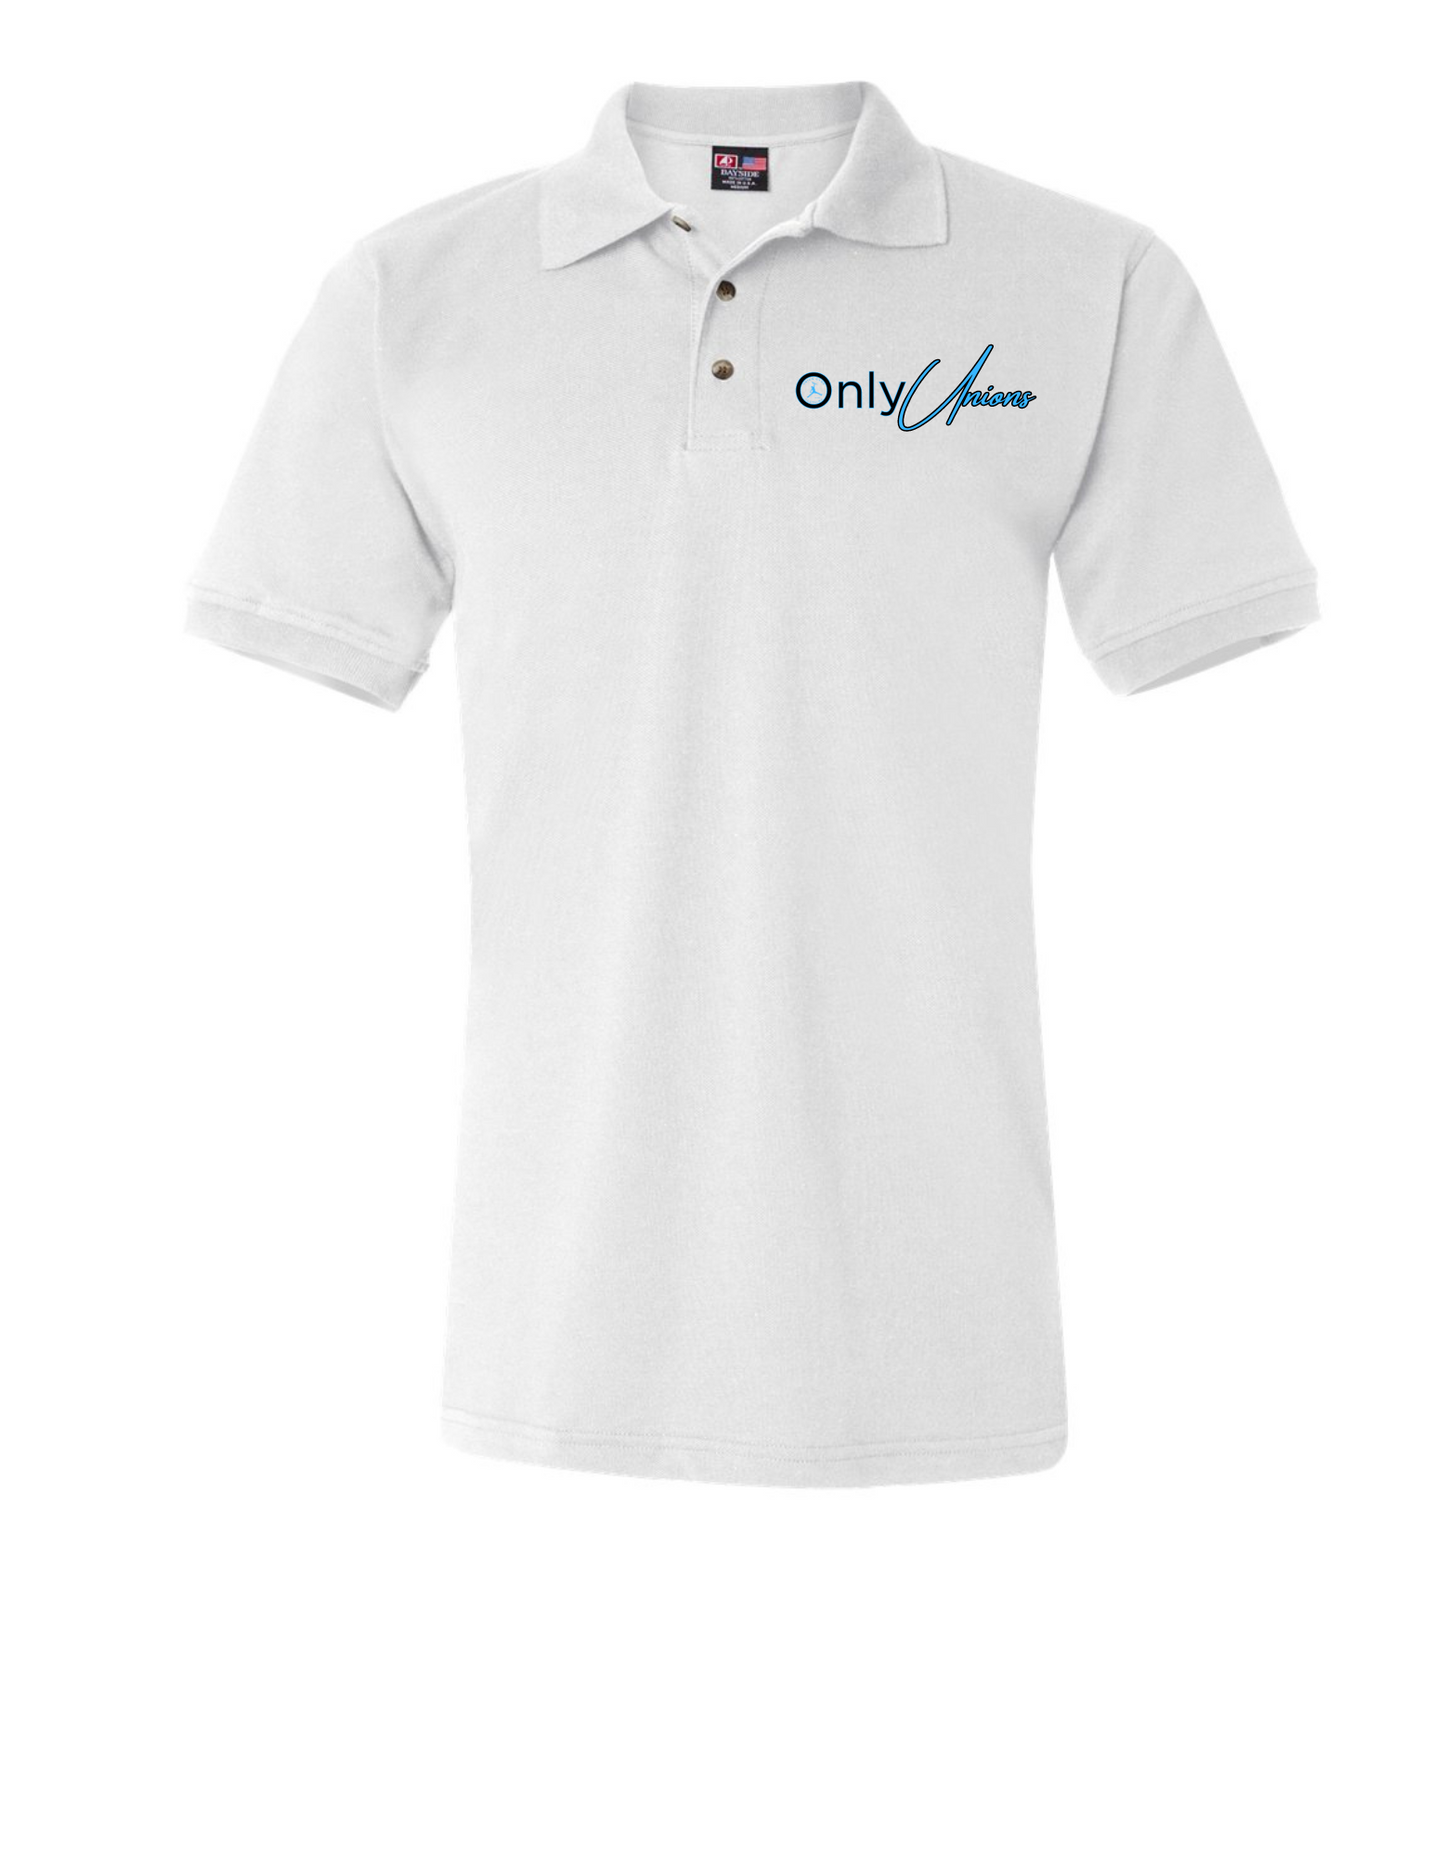 "ONLY UNIONS" Mens polo